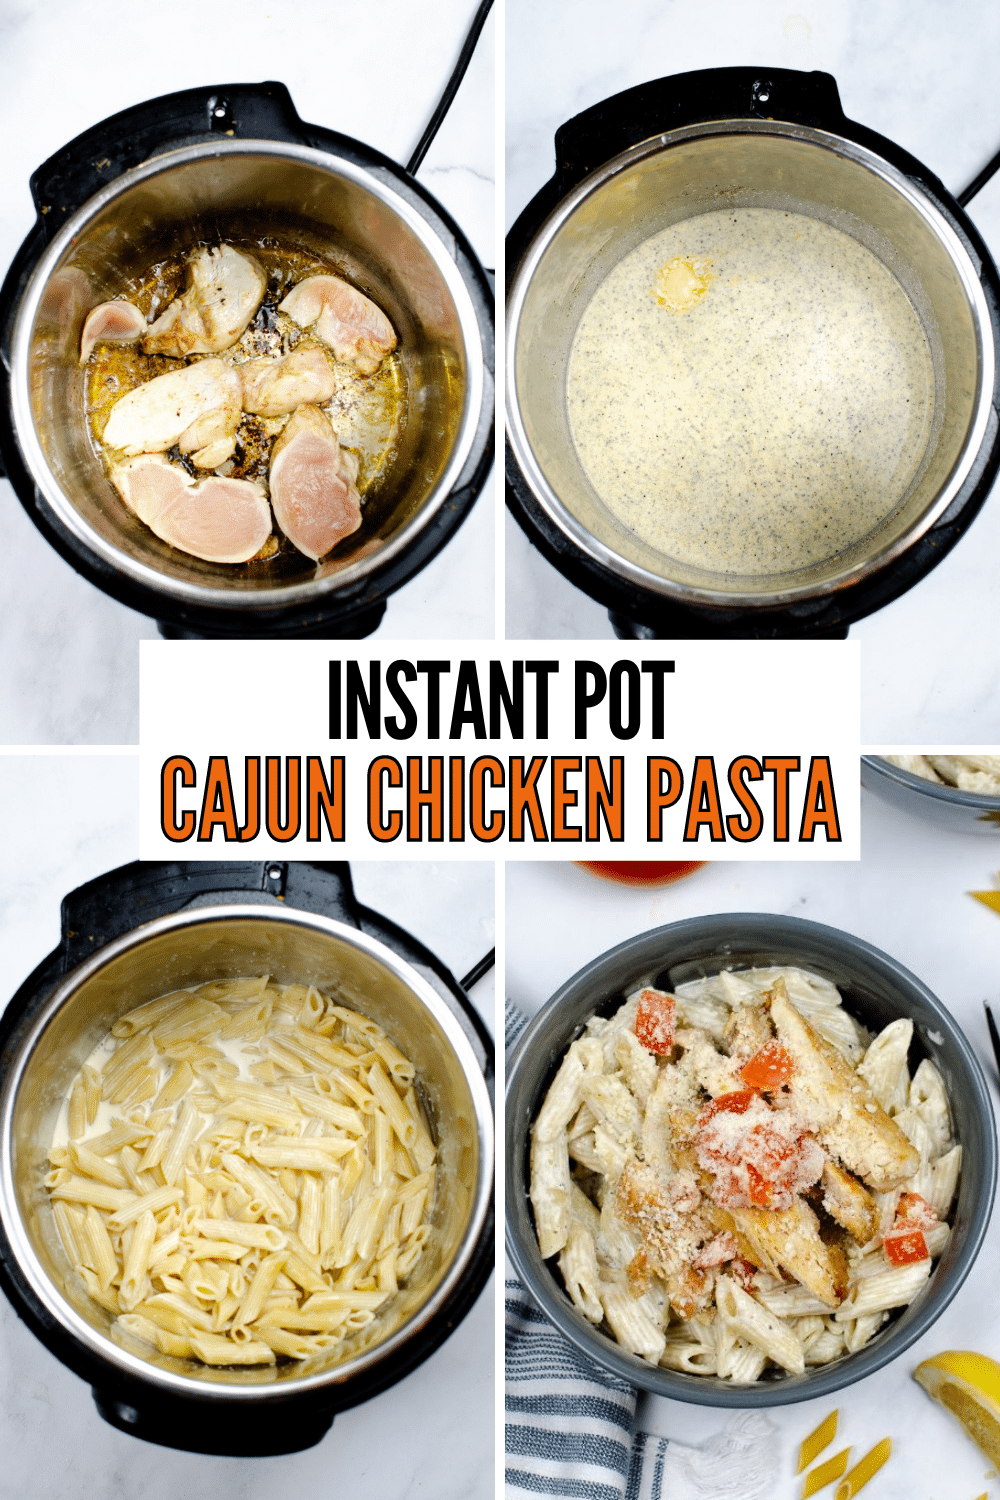 Instant Pot Cajun Chicken Pasta is a creamy and spicy pasta dish that's an easy weeknight dinner. It's family friendly & ready in 40 minutes! #instantpot #pressurecooker #cajun #chicken #pasta via @wondermomwannab